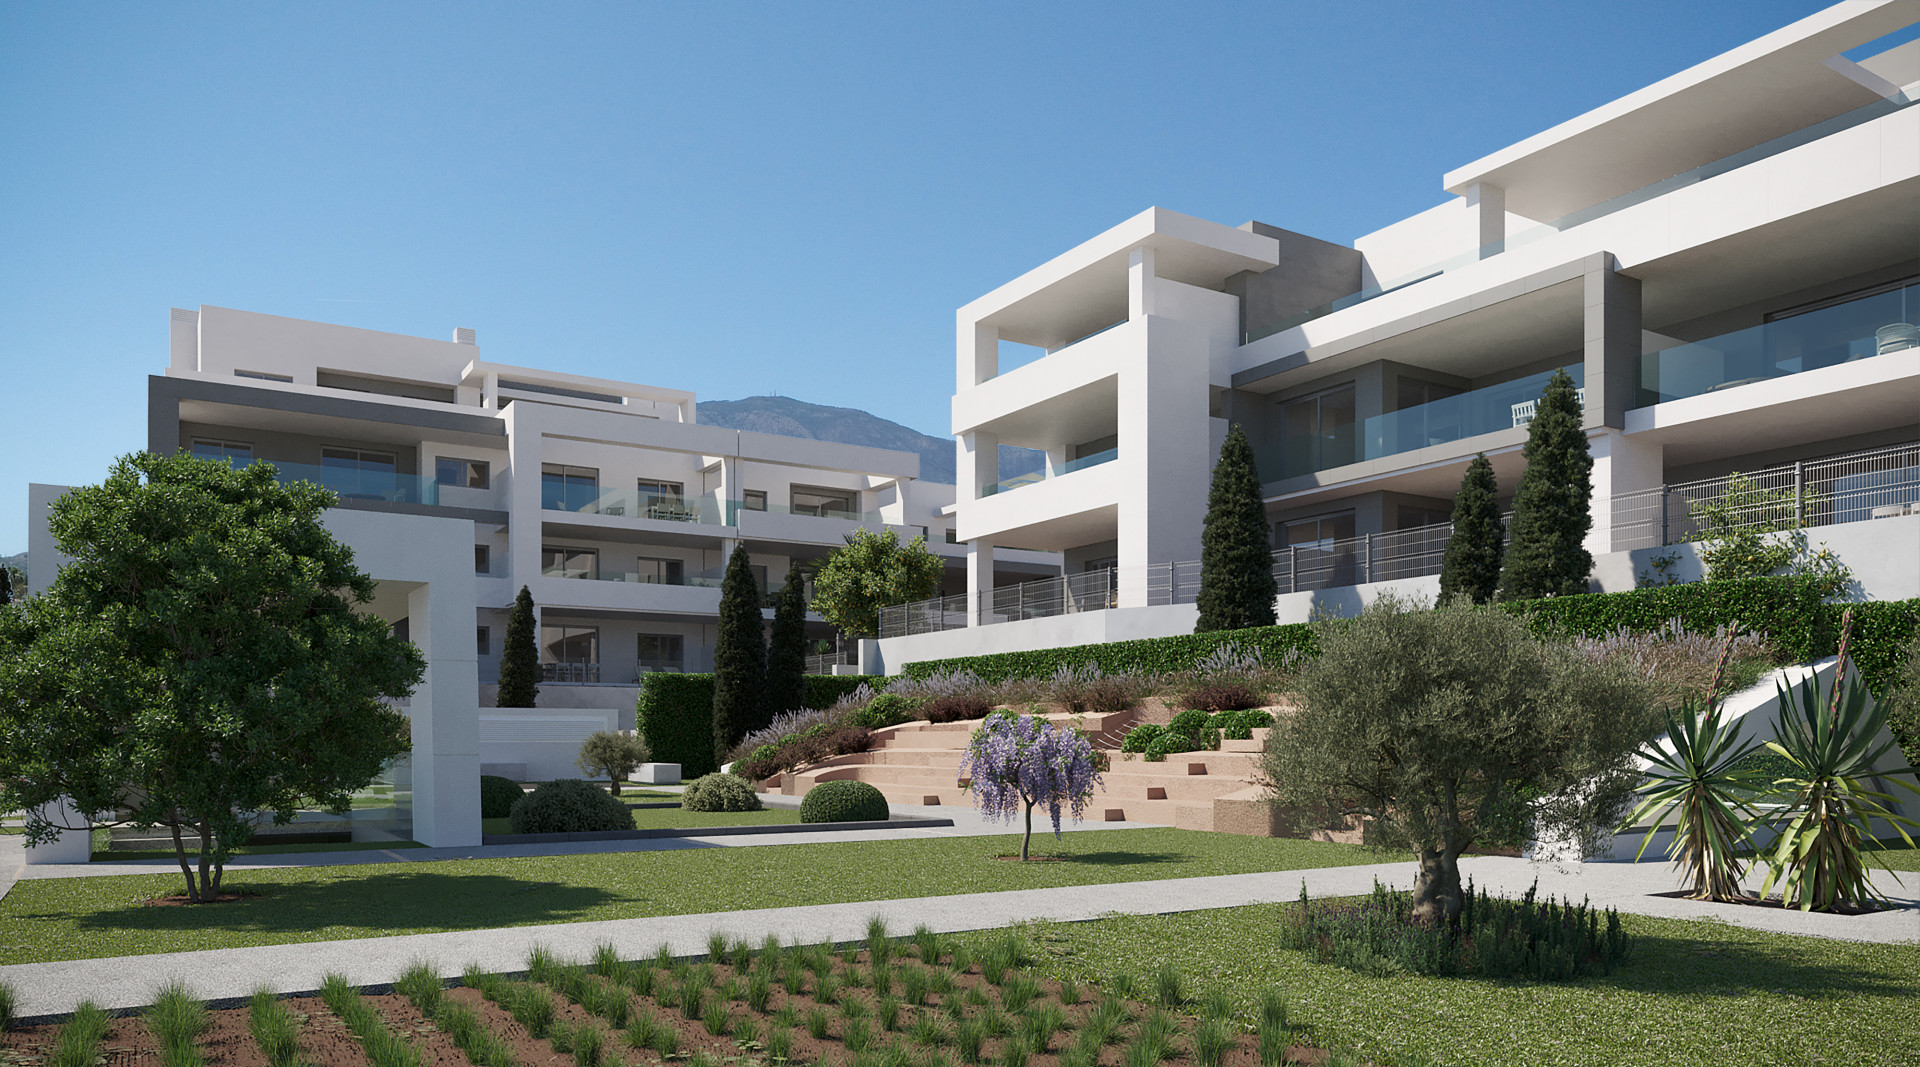 New development of exclusive 1 to 4 bedroom apartments located in an exclusive urbanization in Estepona